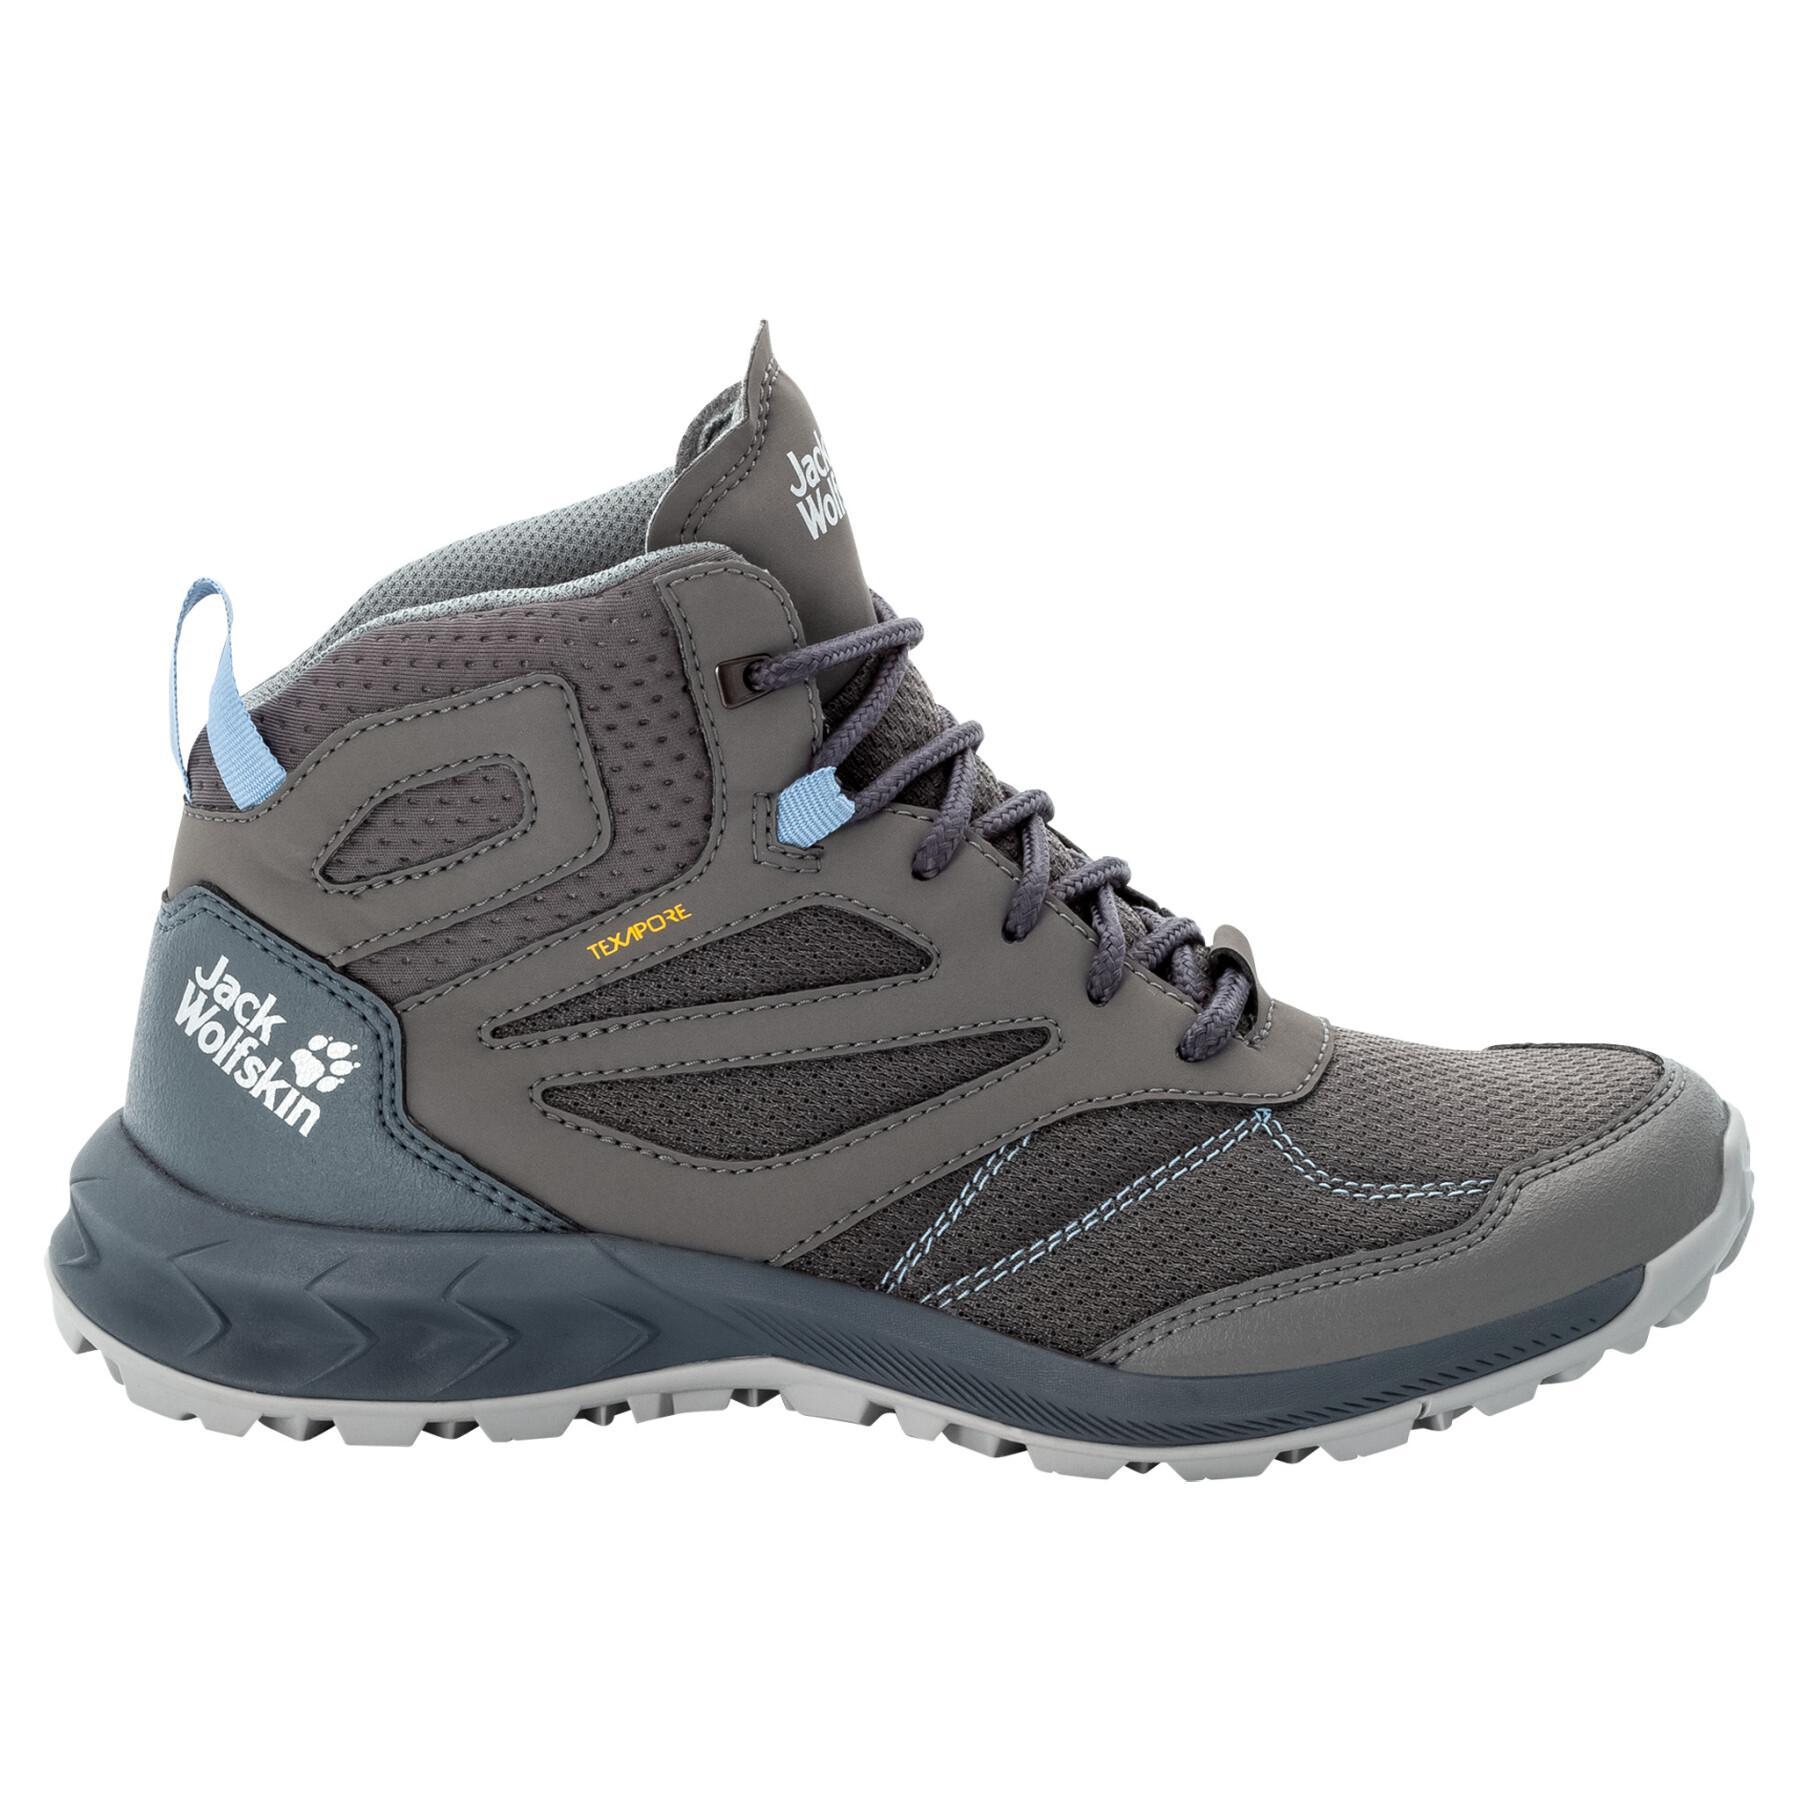 Women's shoes Jack Wolfskin woodland texapore mid